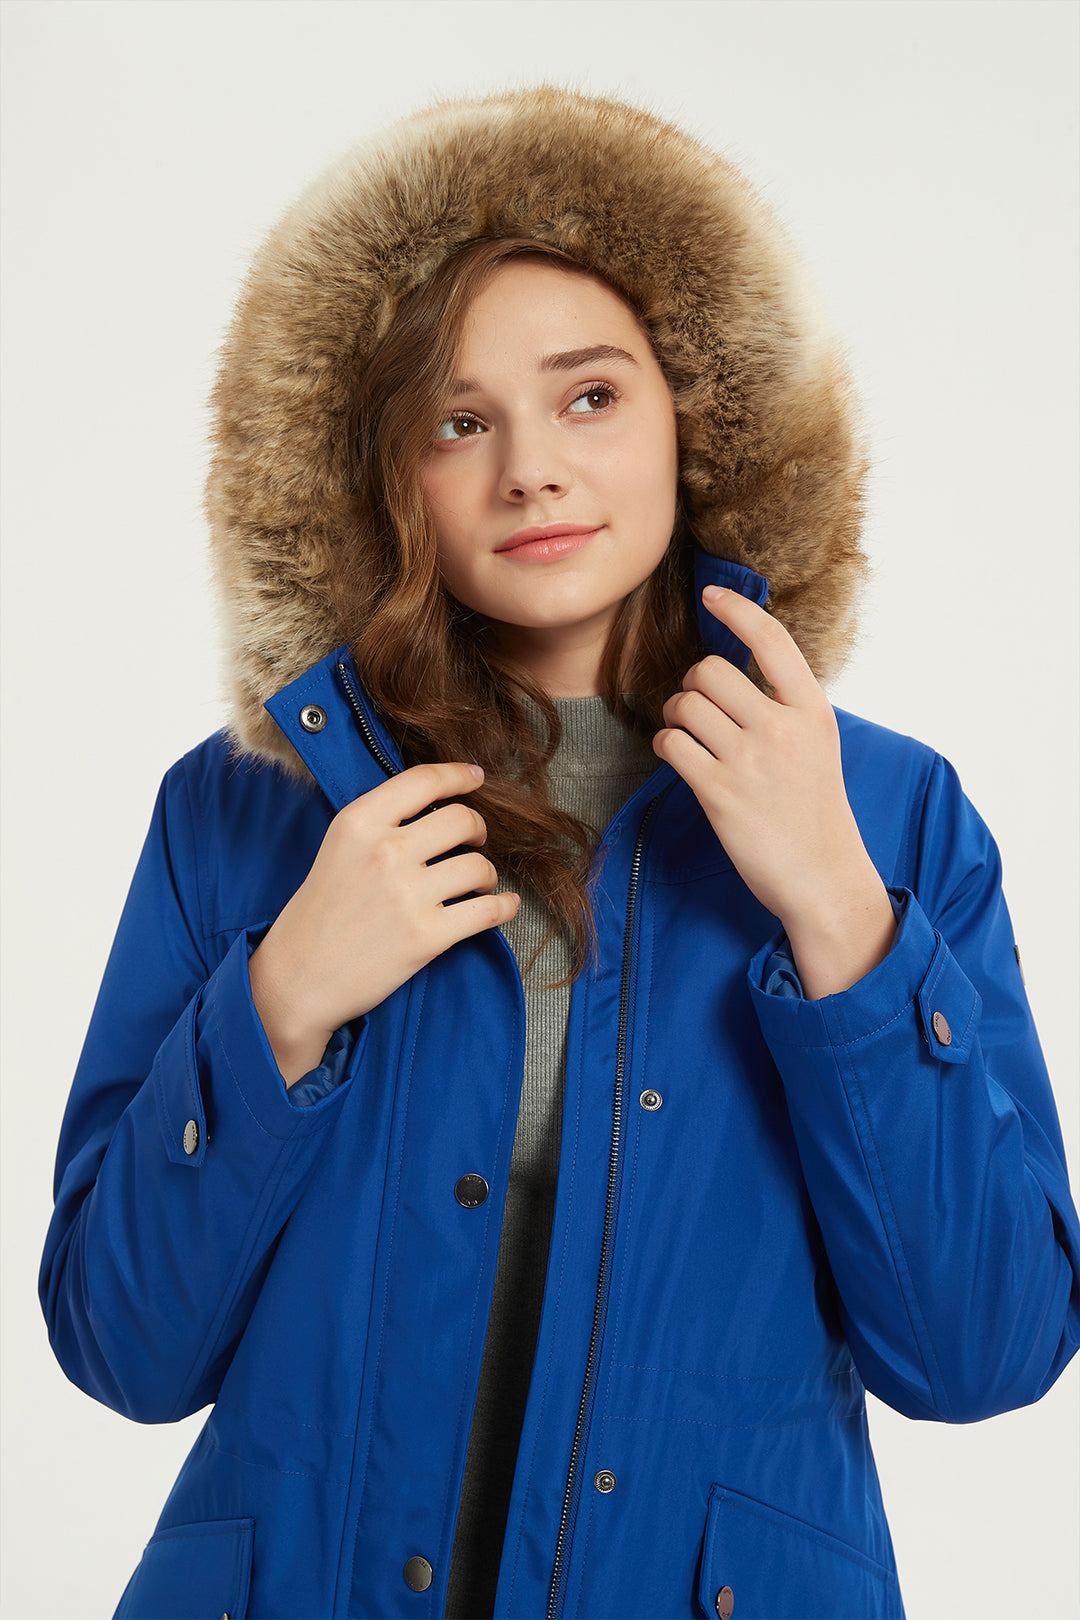 Drawstring Waist Parka Jacket with Removable faux fur hood